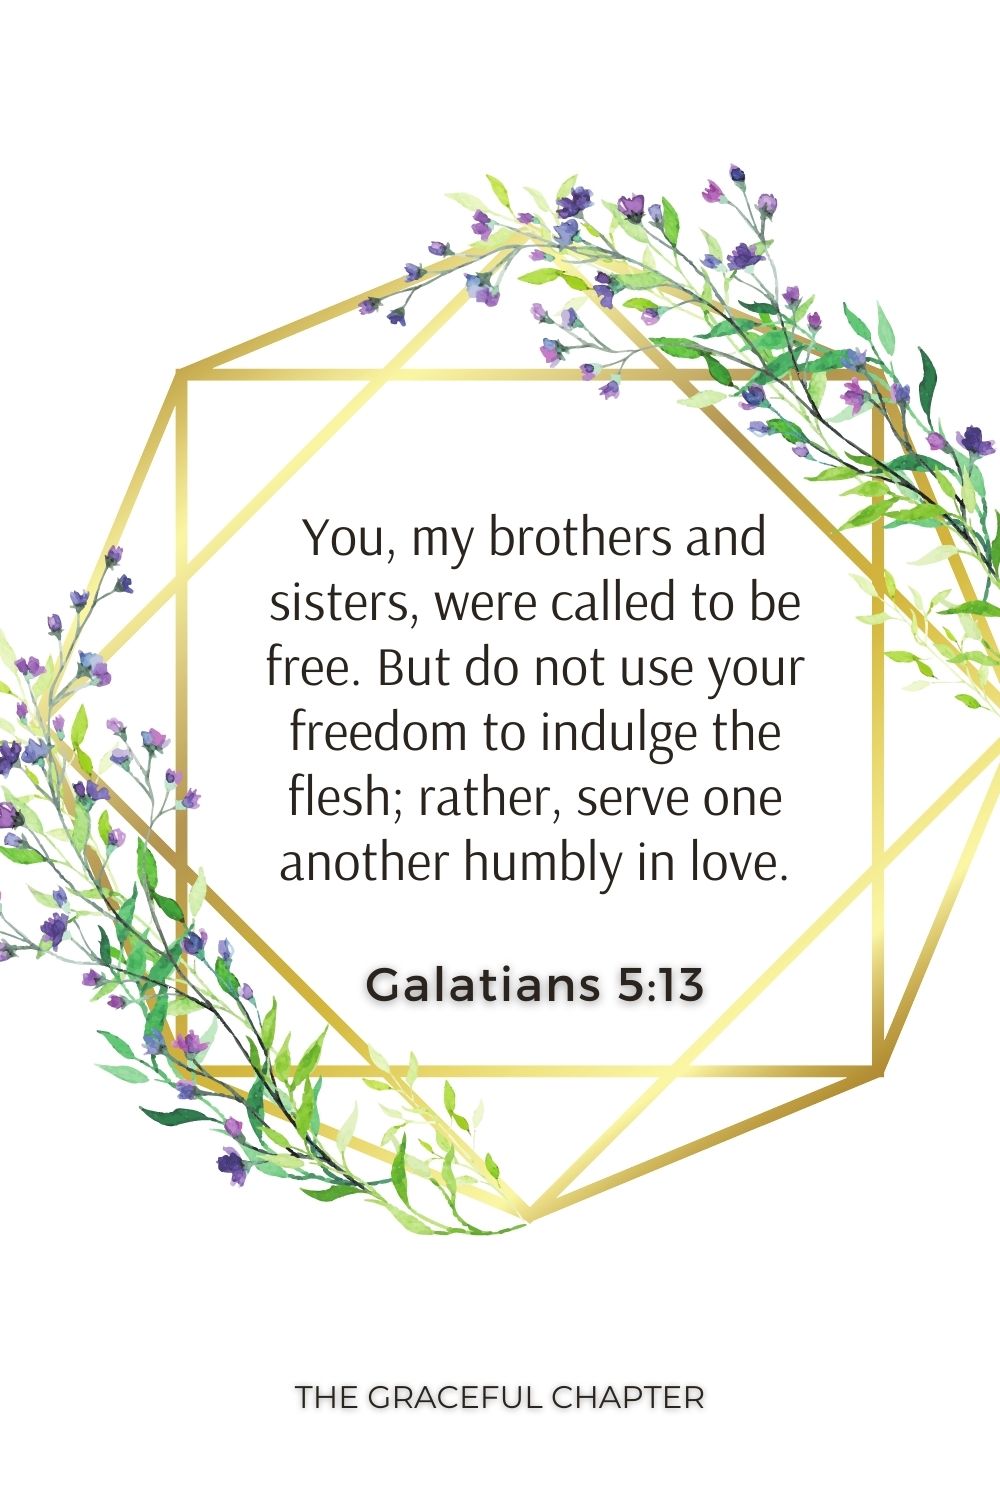 You, my brothers and sisters, were called to be free. But do not use your freedom to indulge the flesh; rather, serve one another humbly in love. Galatians 5:13